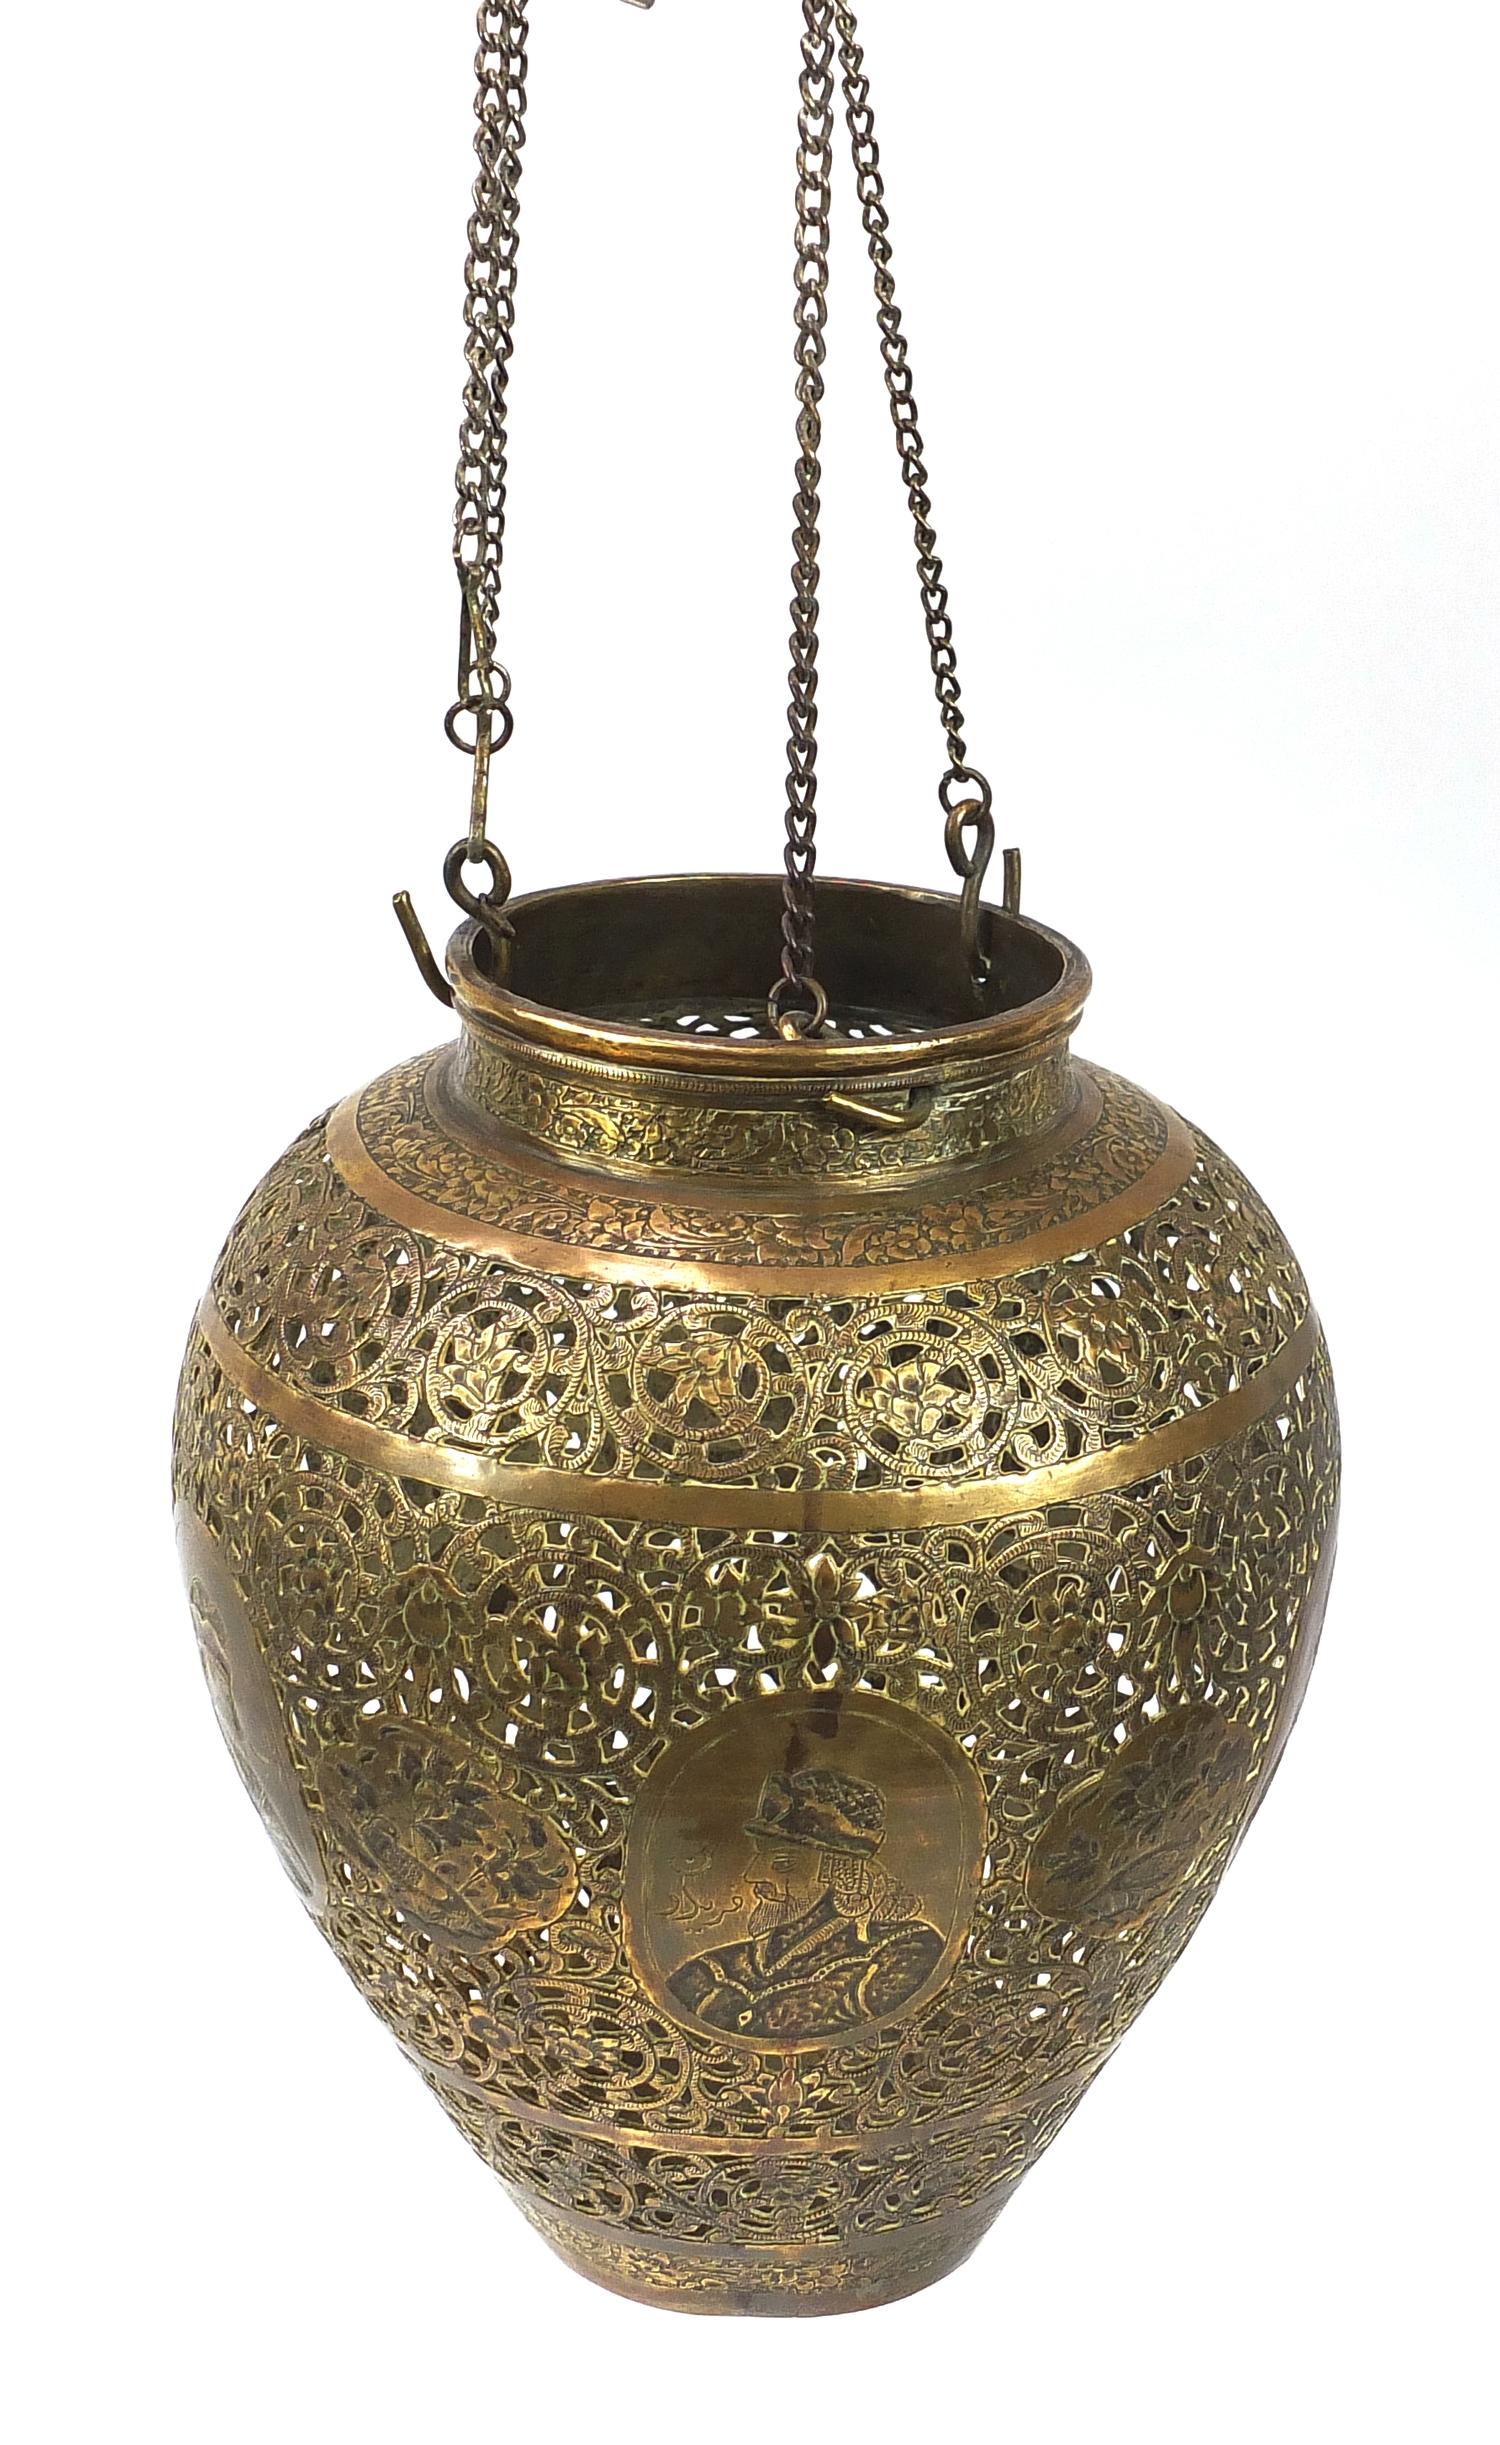 18th century Persian open work lamp engraved with panels of consorts and birds, 22.5cm high : For